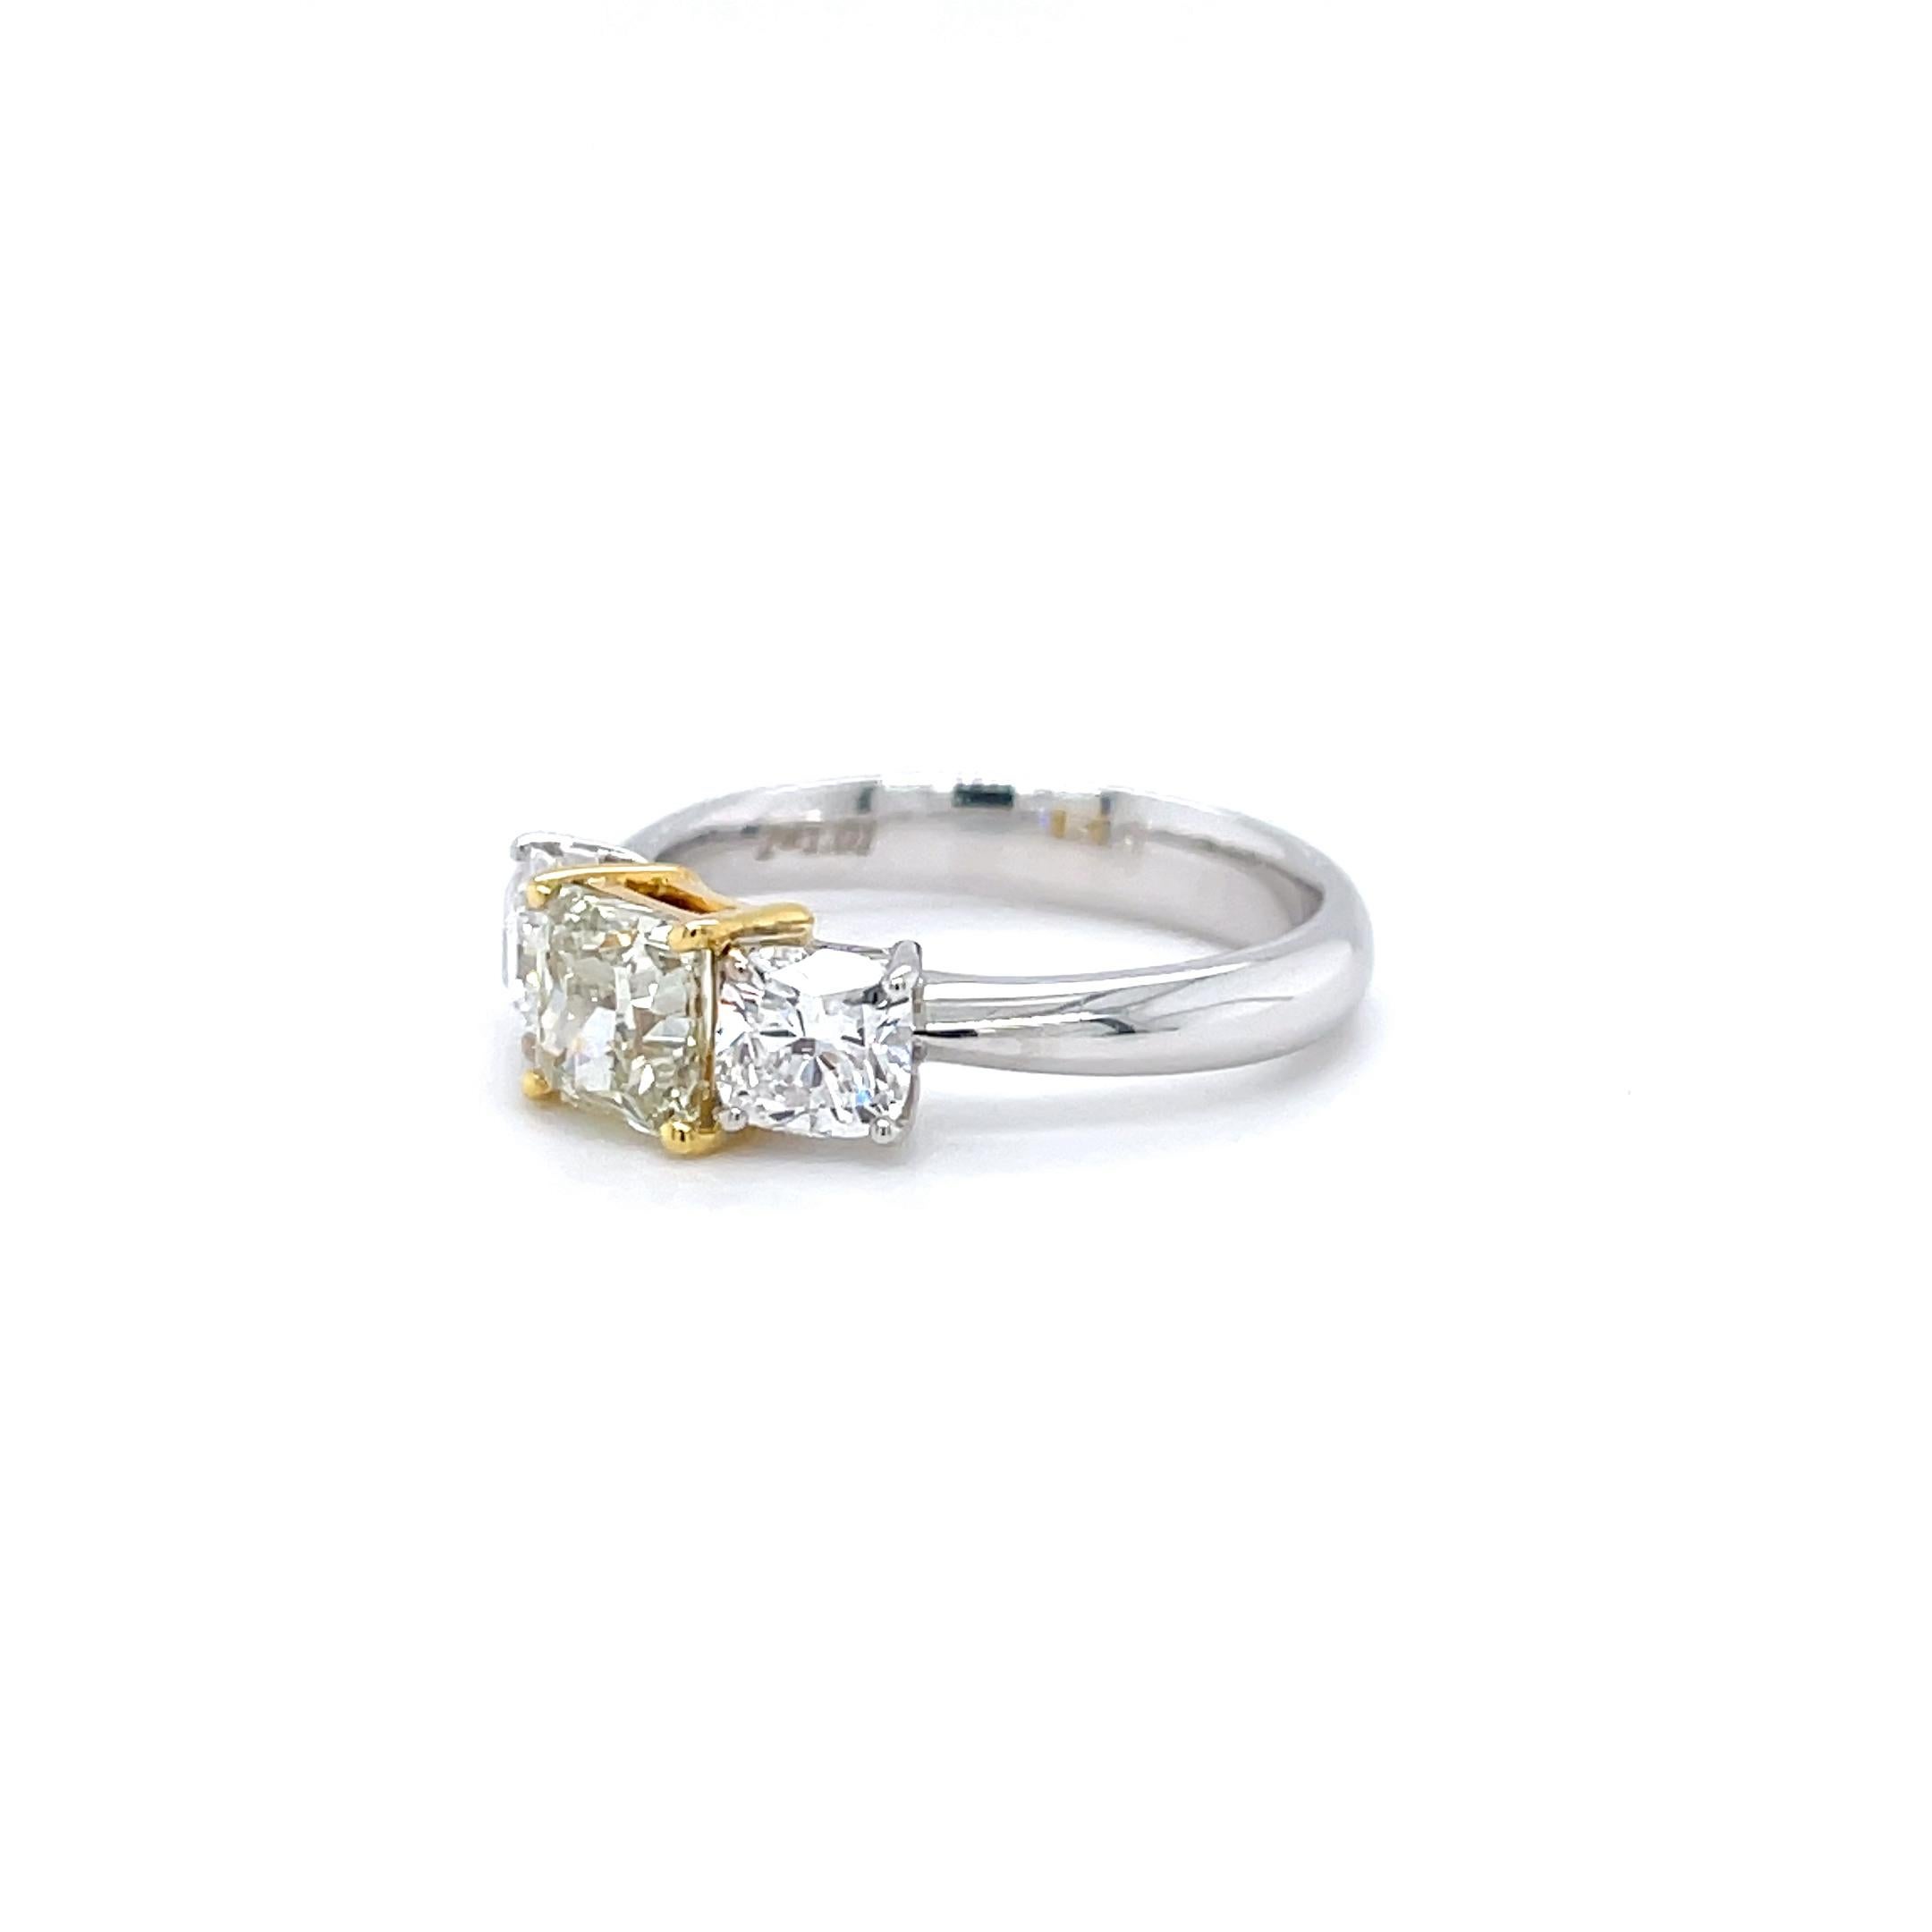 Captivating Three-Stone Ring Featuring a Rare Fancy Light Yellowish Green Diamond

This captivating three-stone ring features a truly unique center stone: a 1.00 carat square radiant cut diamond certified by the Gemological Institute of America